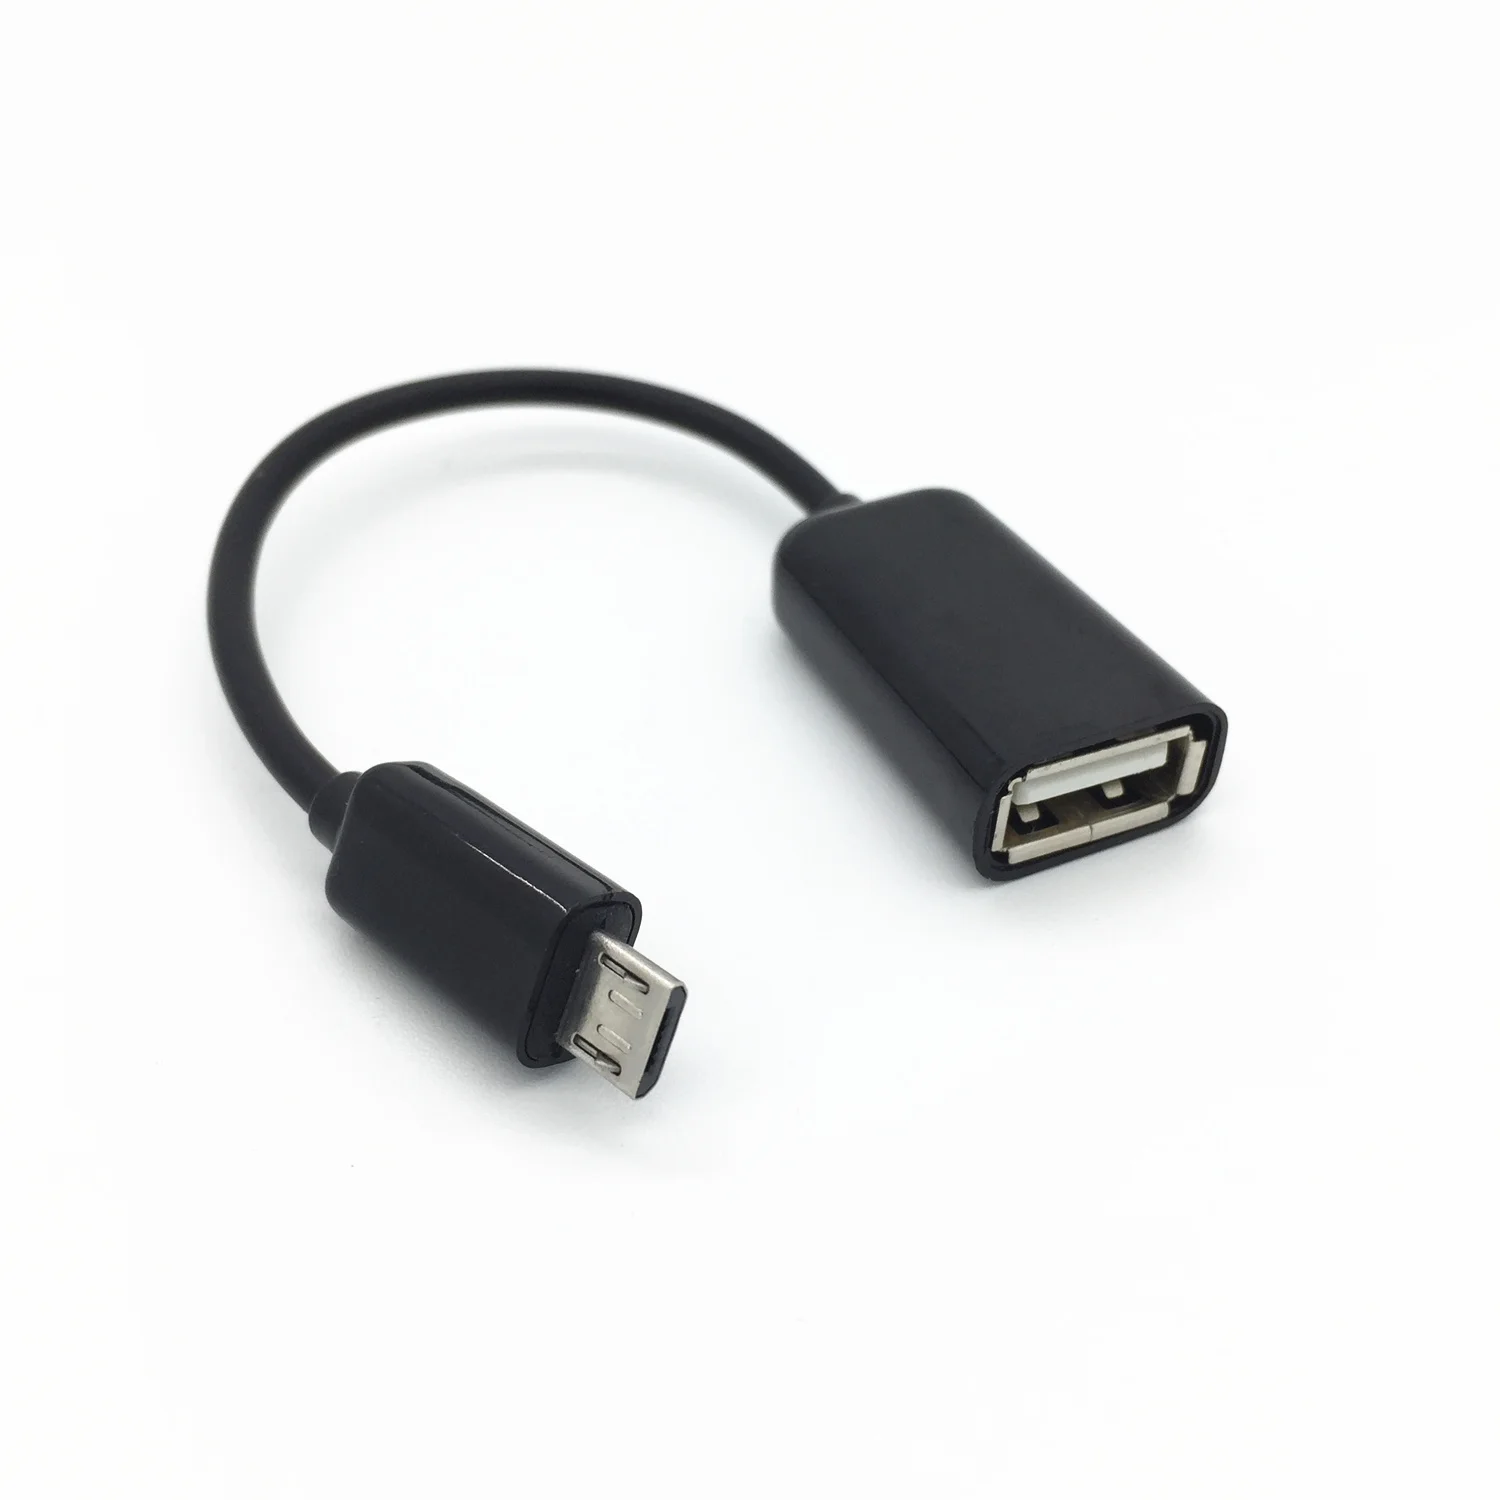 USB Host OTG Adaptor Adapter Cable For Samsung Galaxy Tab 3 10.1 GT-P5210 ZWYXAR 8.0 SM-T310 T311 T315 T320 GT-P3200 P3210